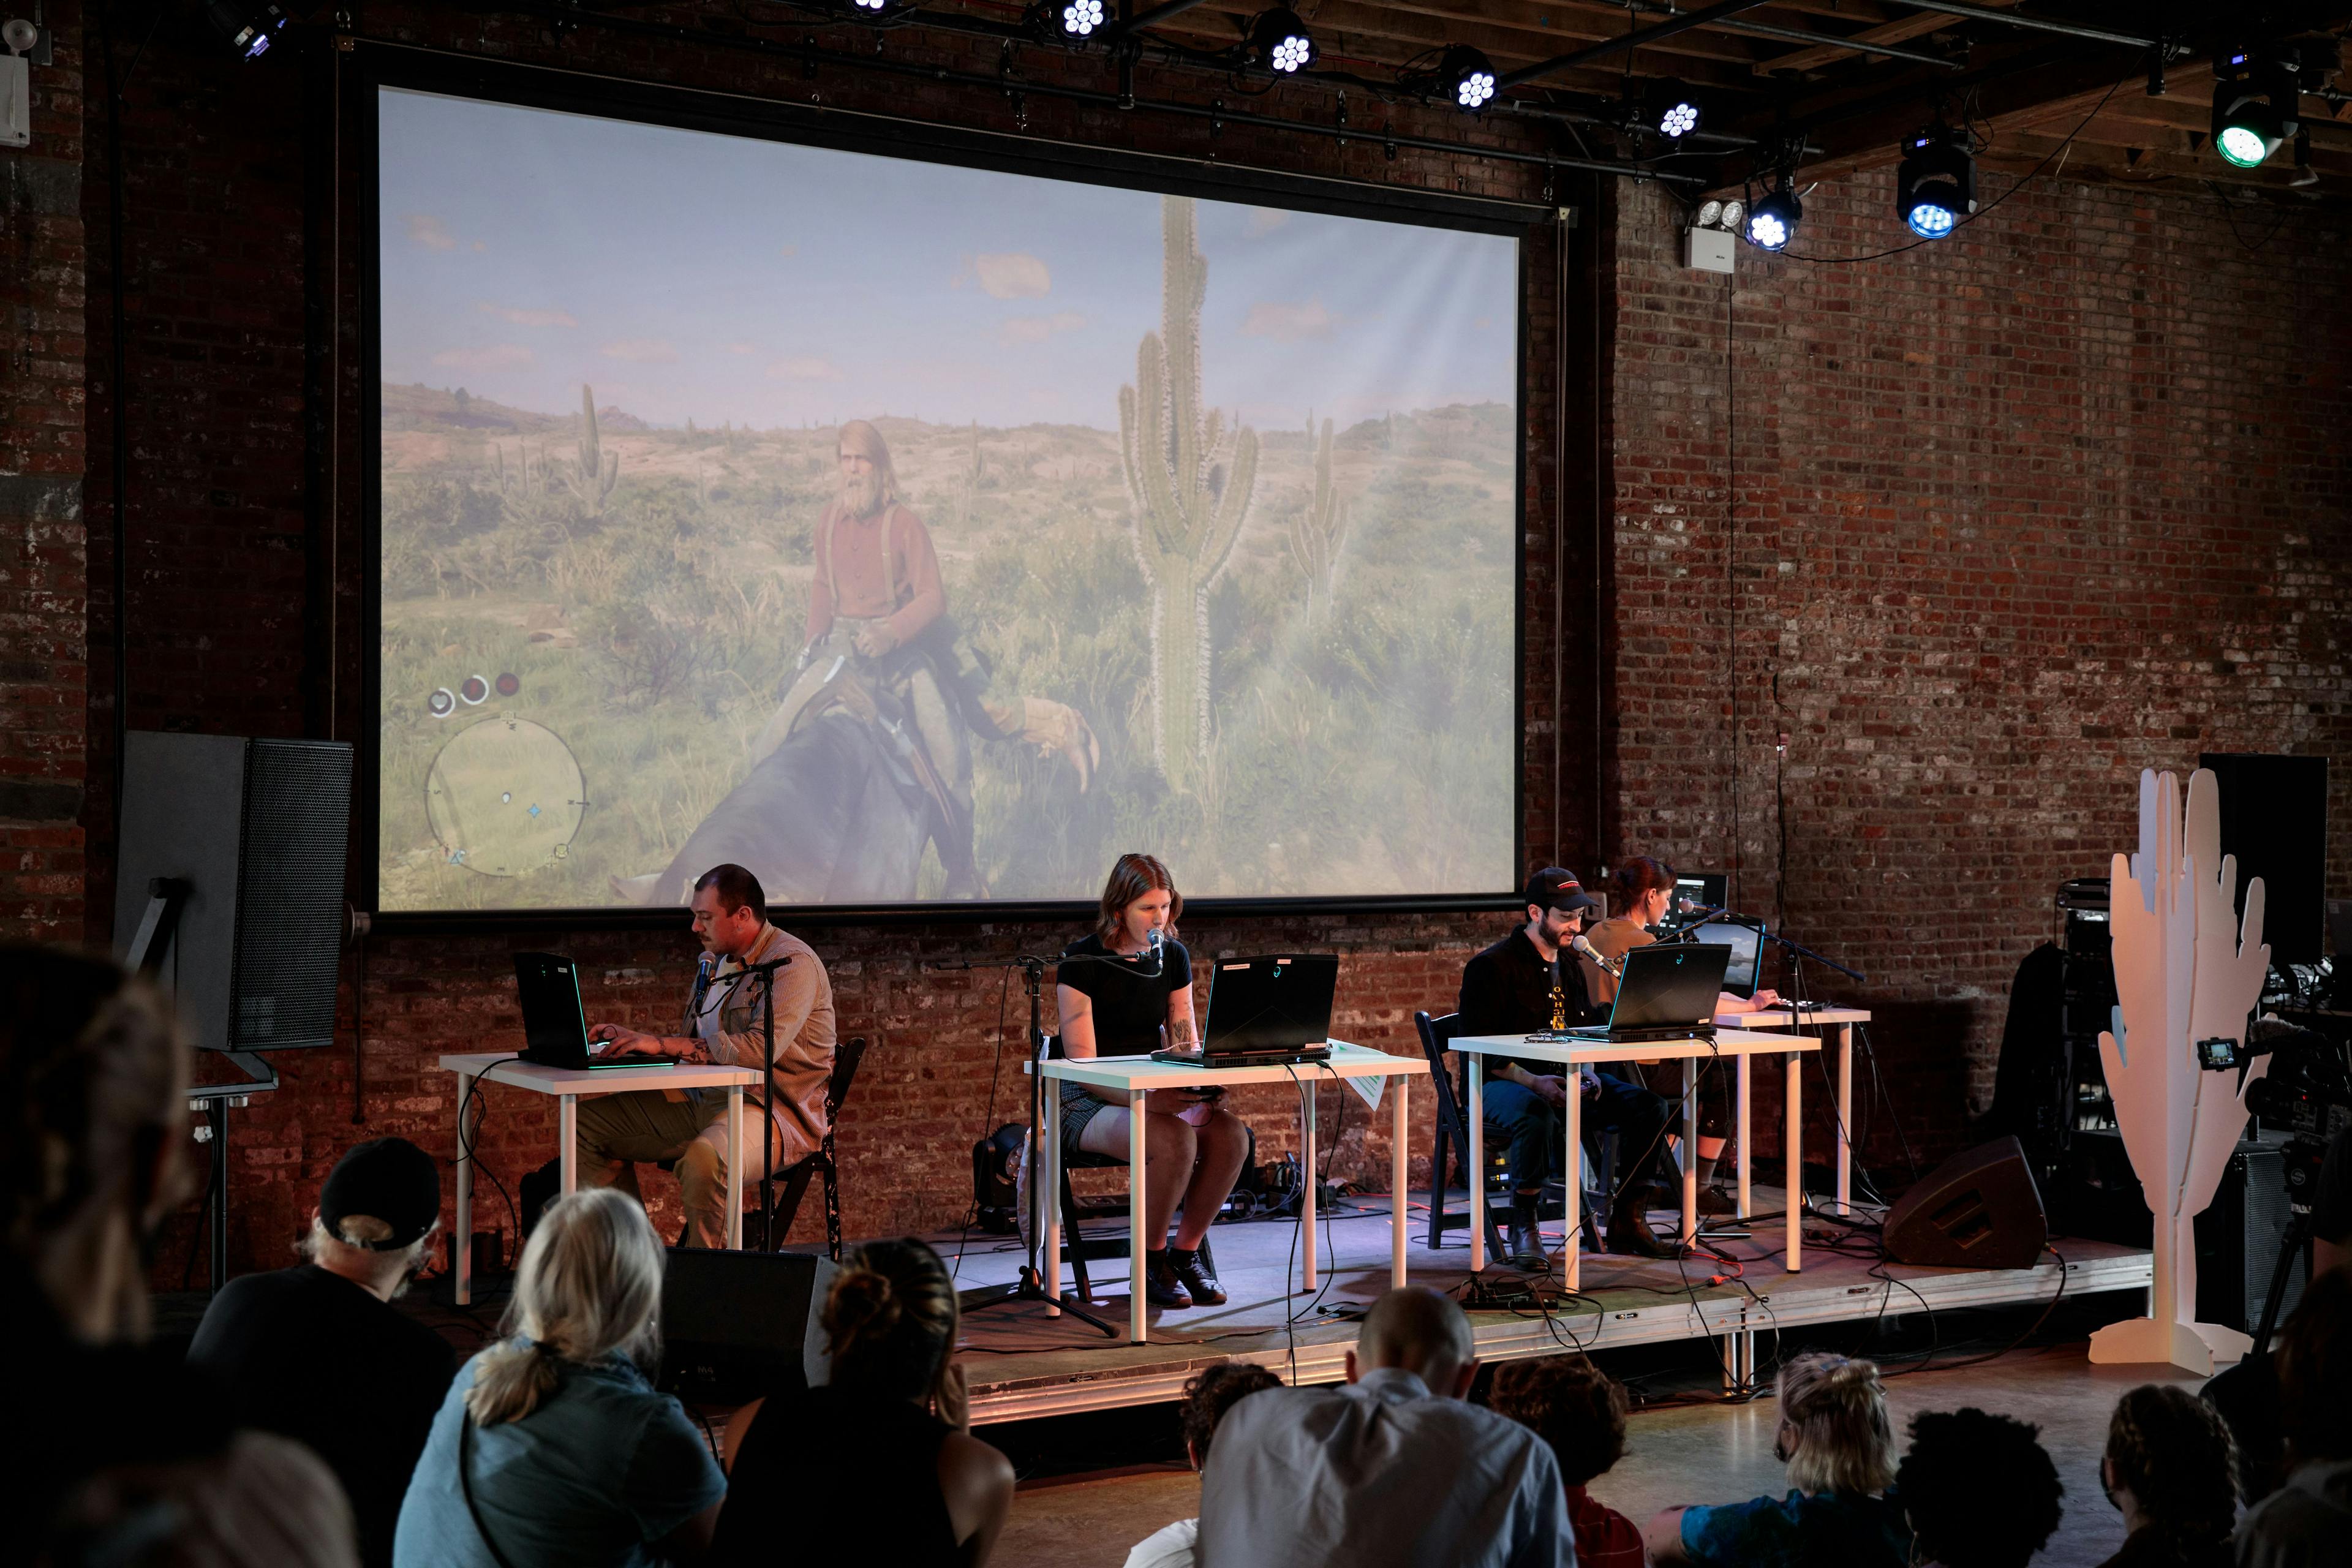 In a spacious brick room, four people sit at individual desks with laptops on a shallow stage, reciting out towards an audience on all three sides of the stage. Behind the performers is a large screen with a projection of a video game, showing a man on a horse in a desert scene.